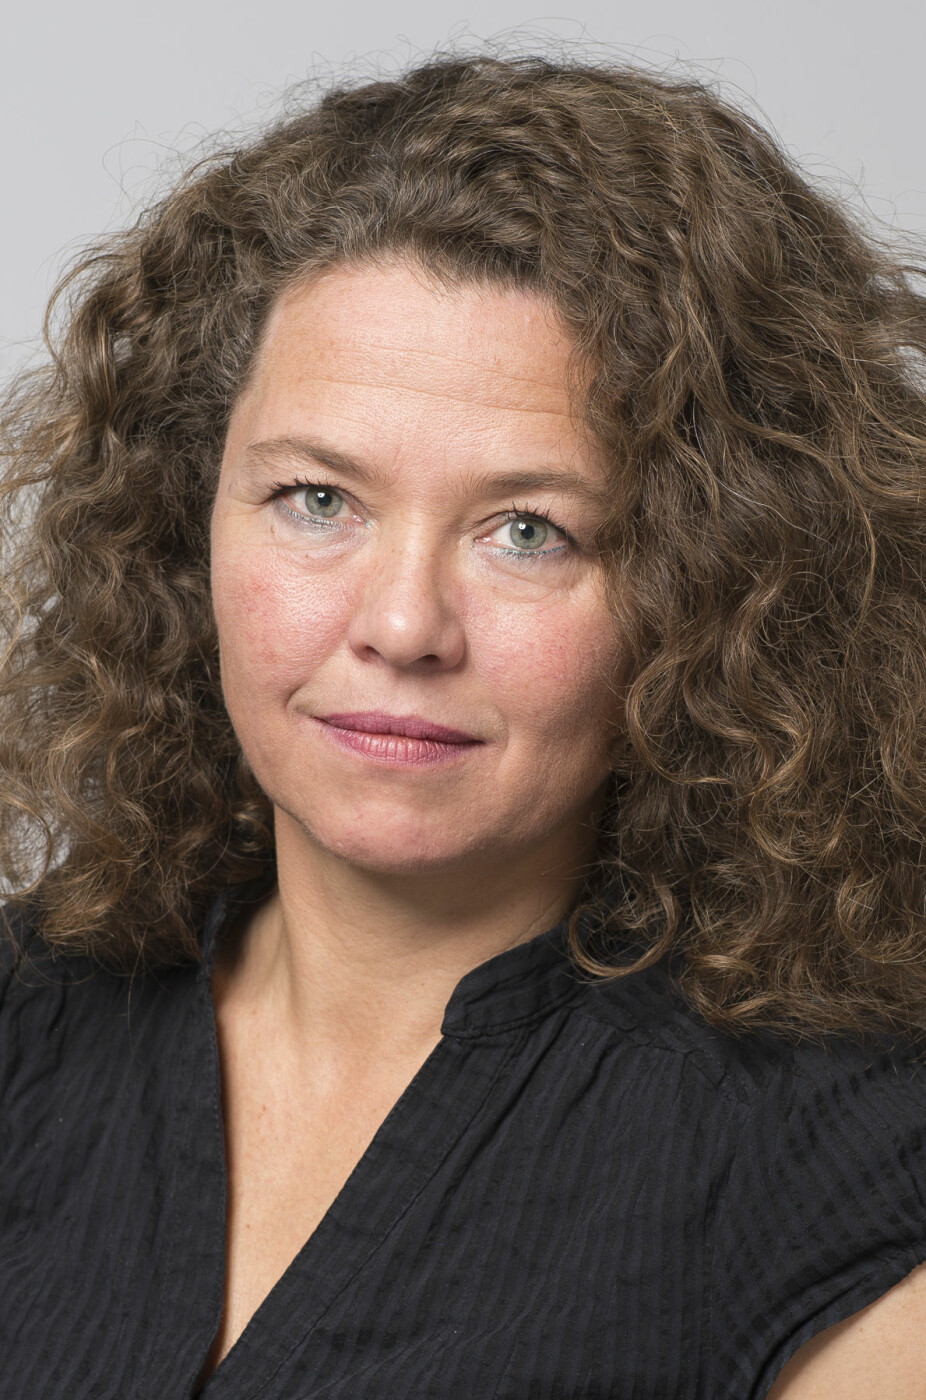 Aud Tennøy is chief researcher at the Institute of Transport Economics